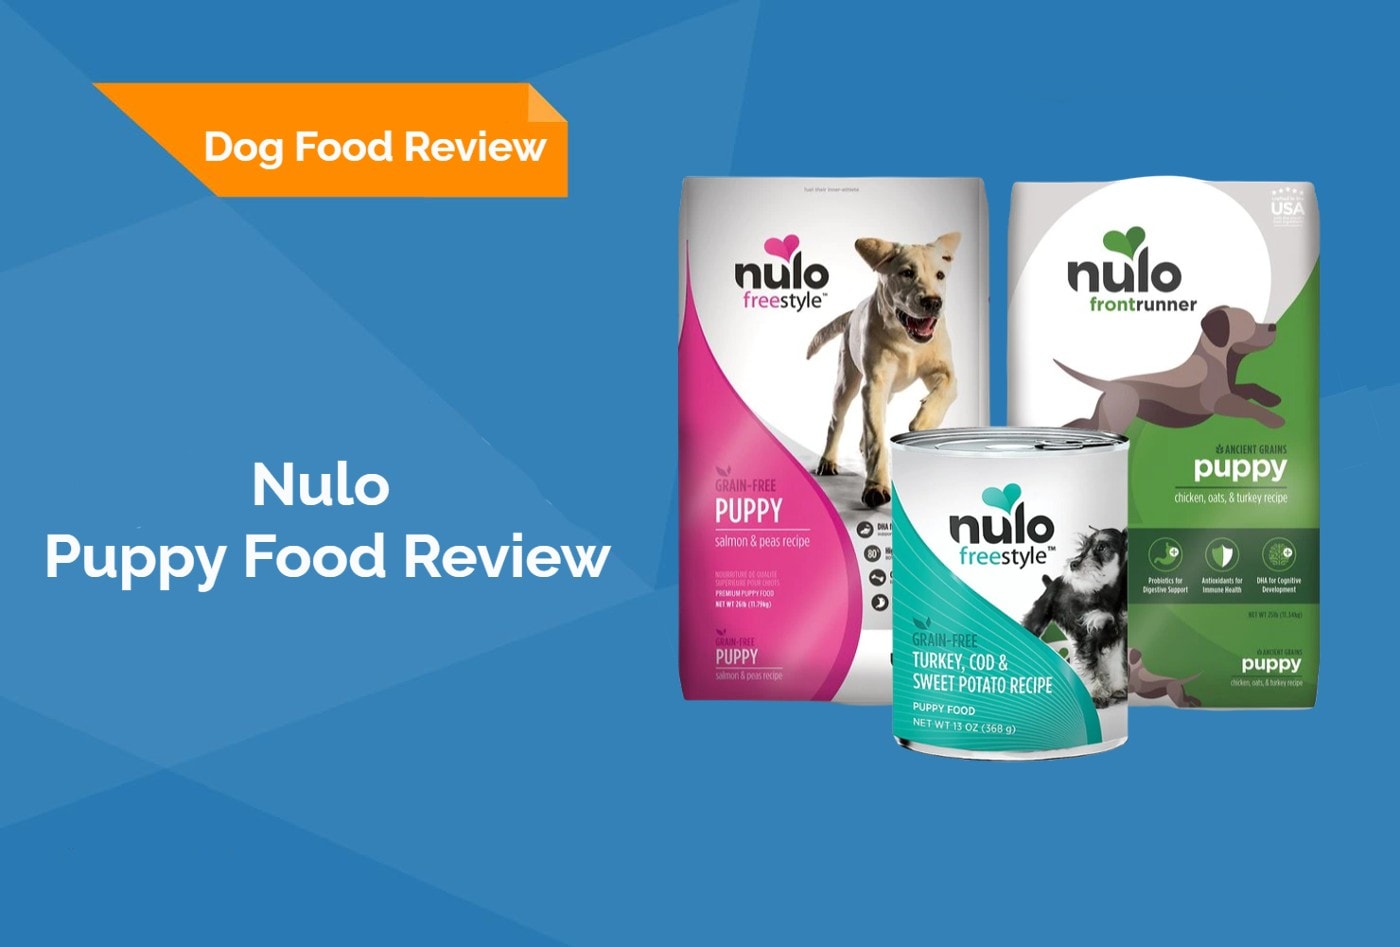 Nulo Puppy Food Review